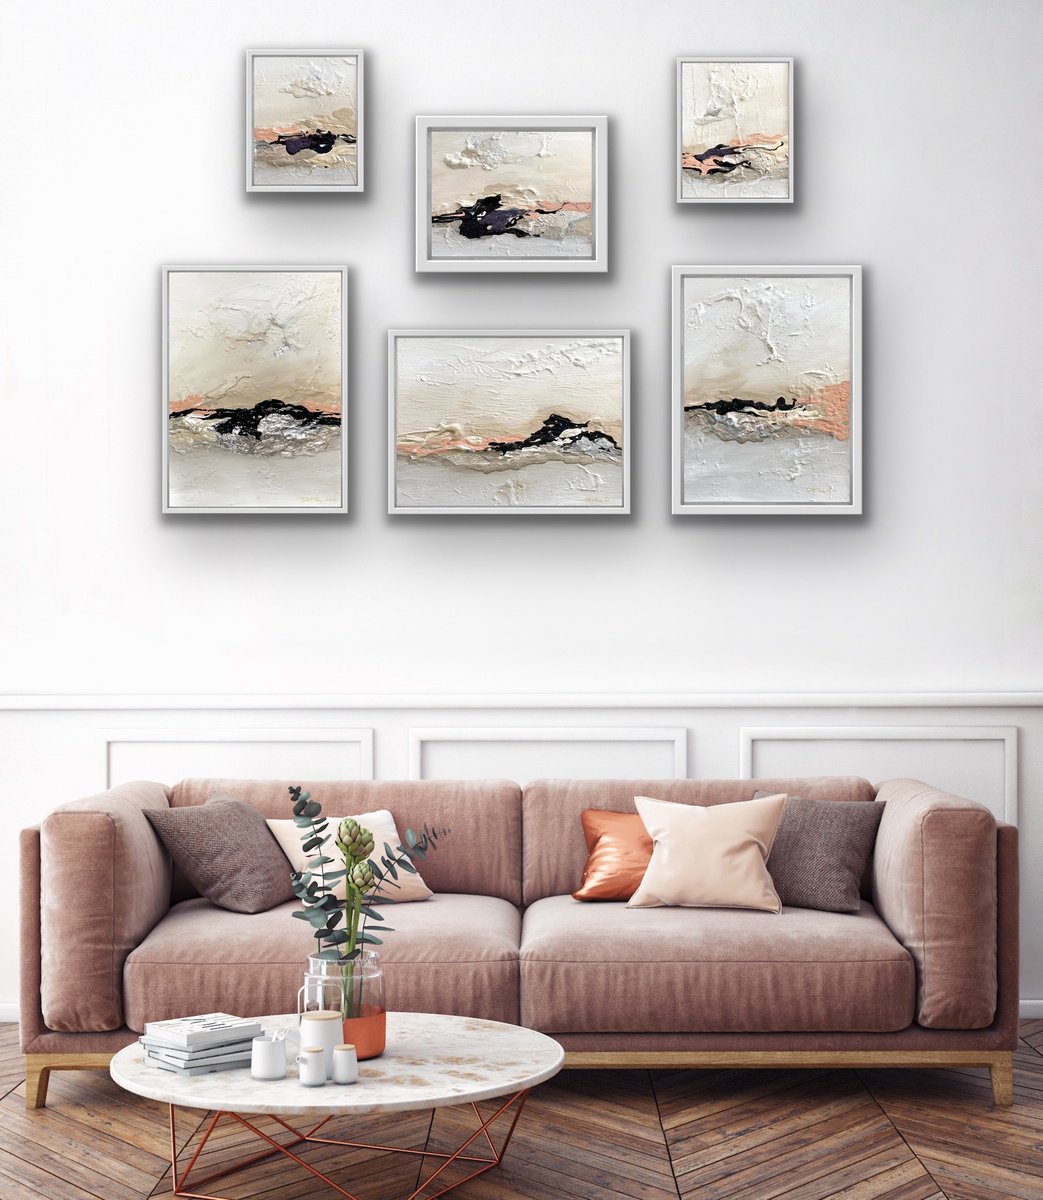 Poetic Landscape III- Peach , White, Black - Composition 7 paintings framed - Wall Art Rea... by Daniela Pasqualini